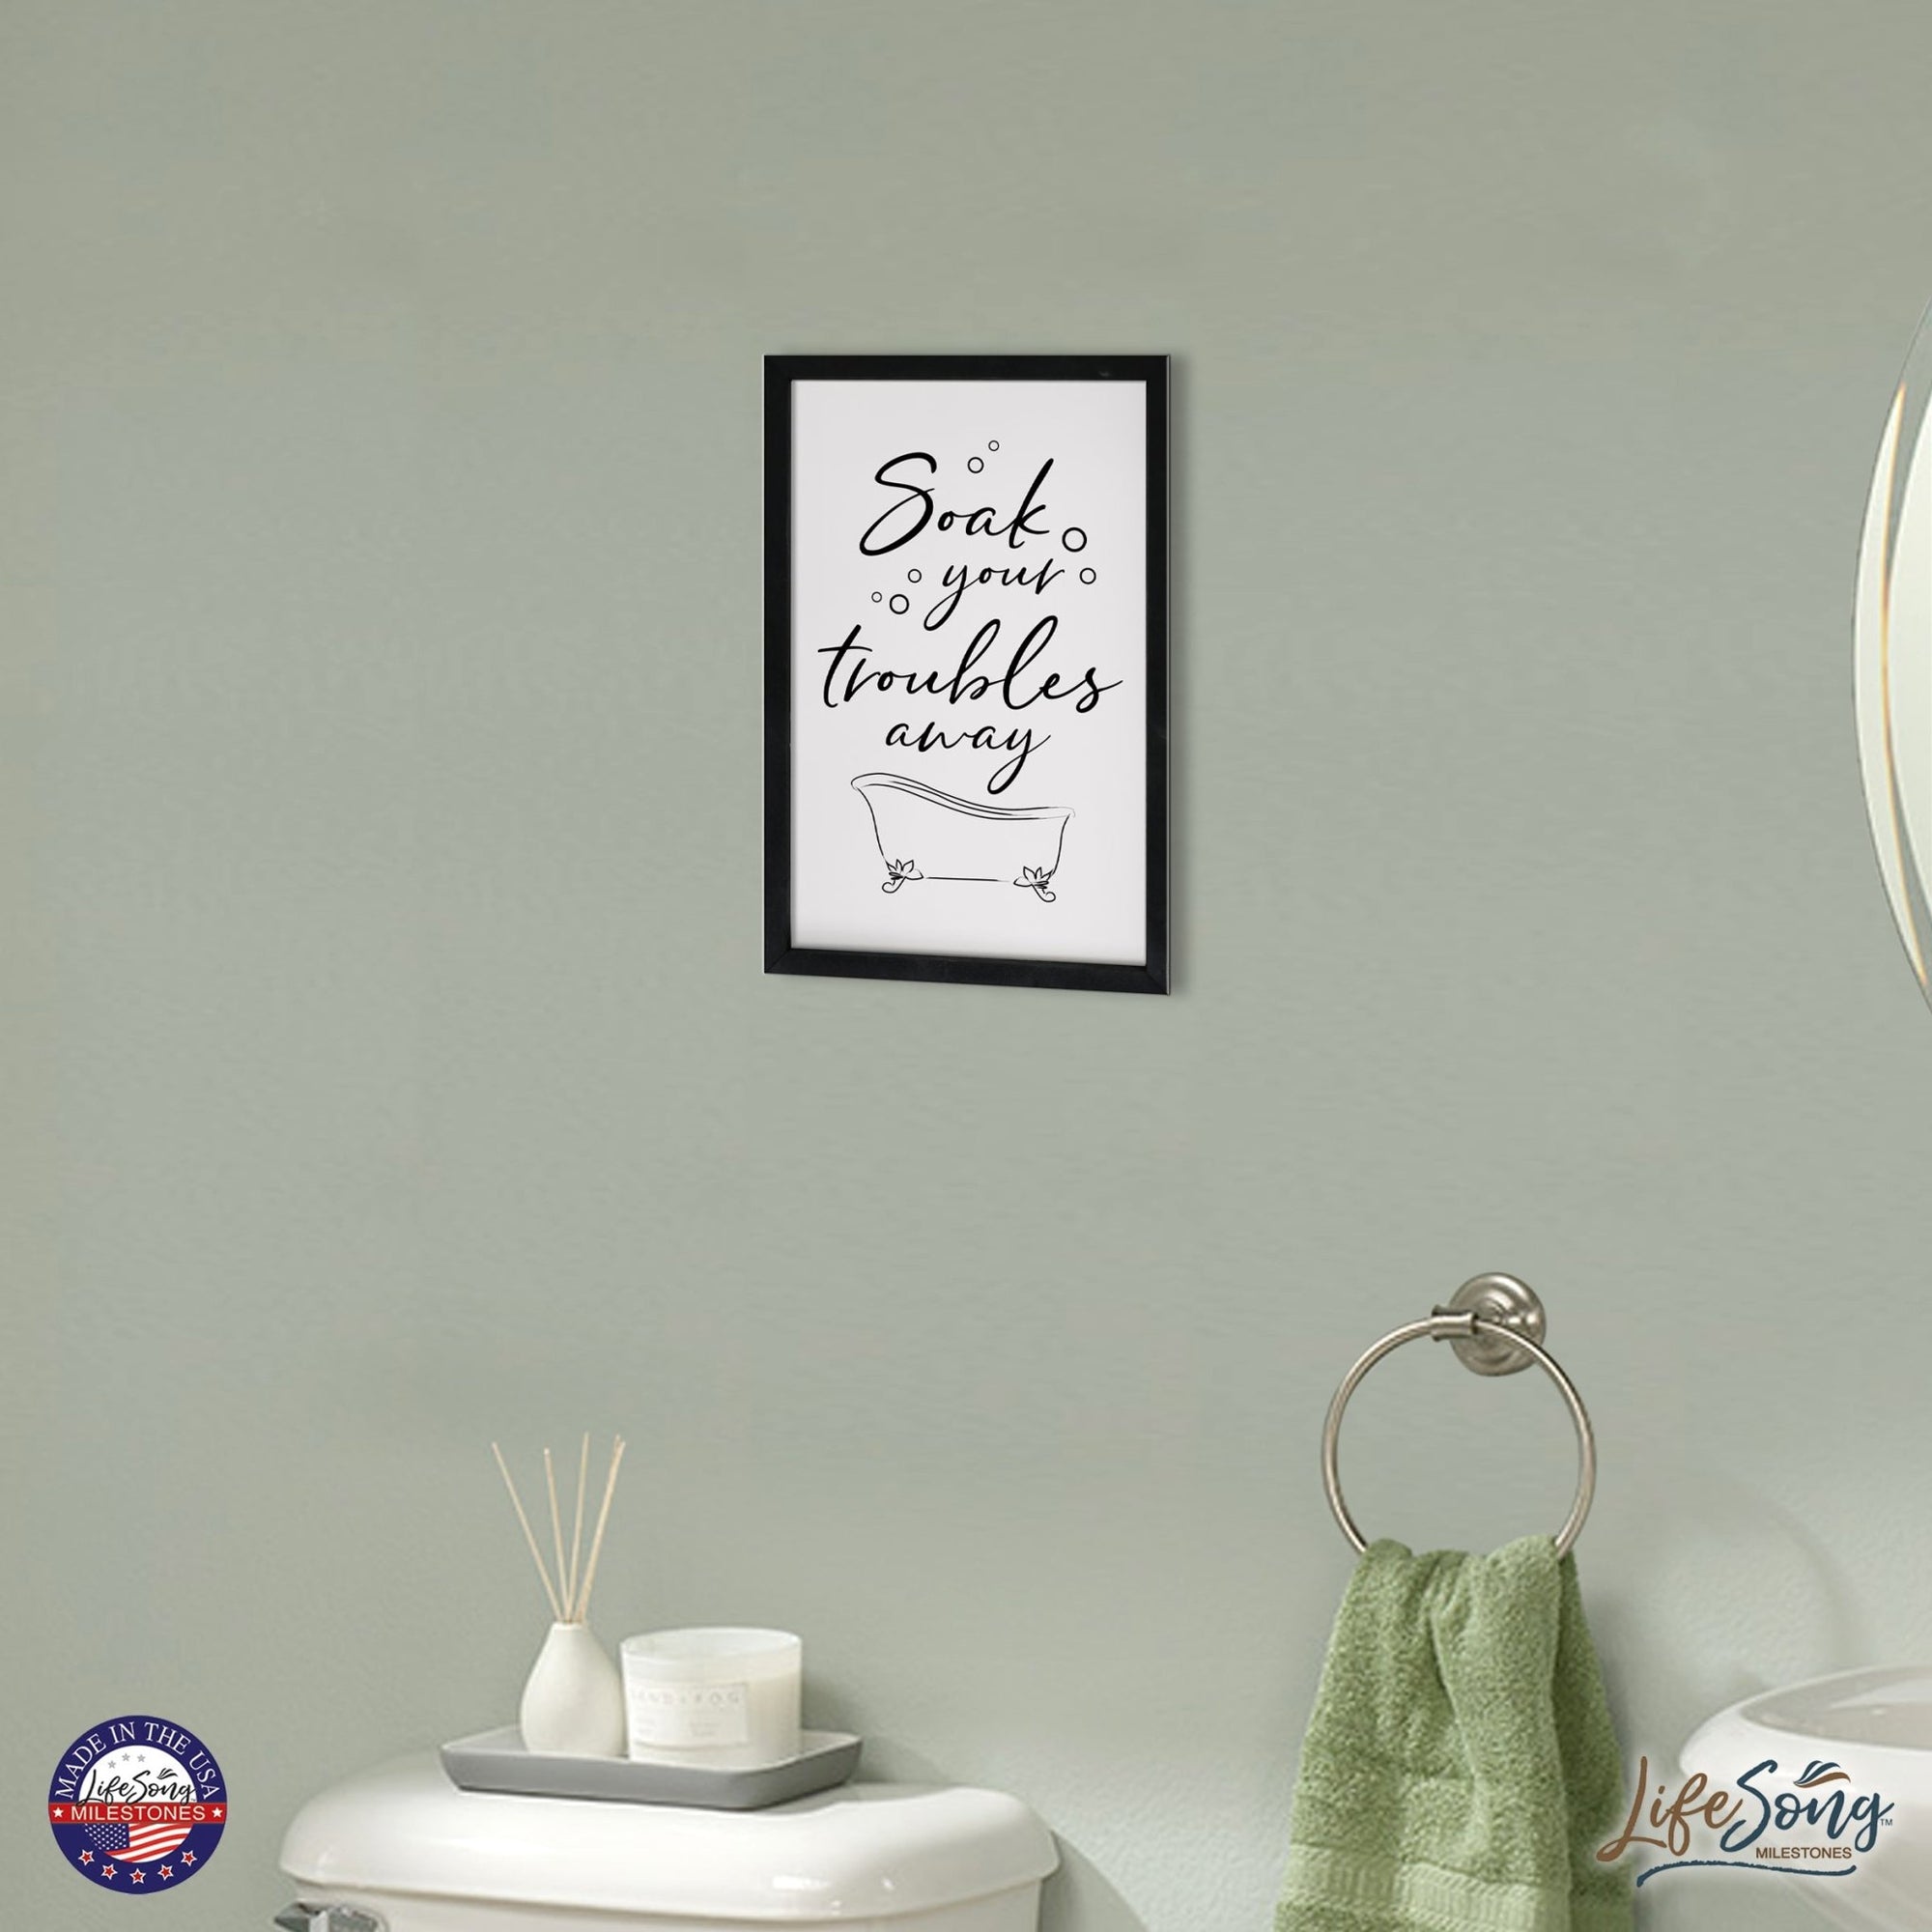 Inspirational Bathroom Decor Framed Shadow Box 7x10in (Soak Your Troubles) - LifeSong Milestones